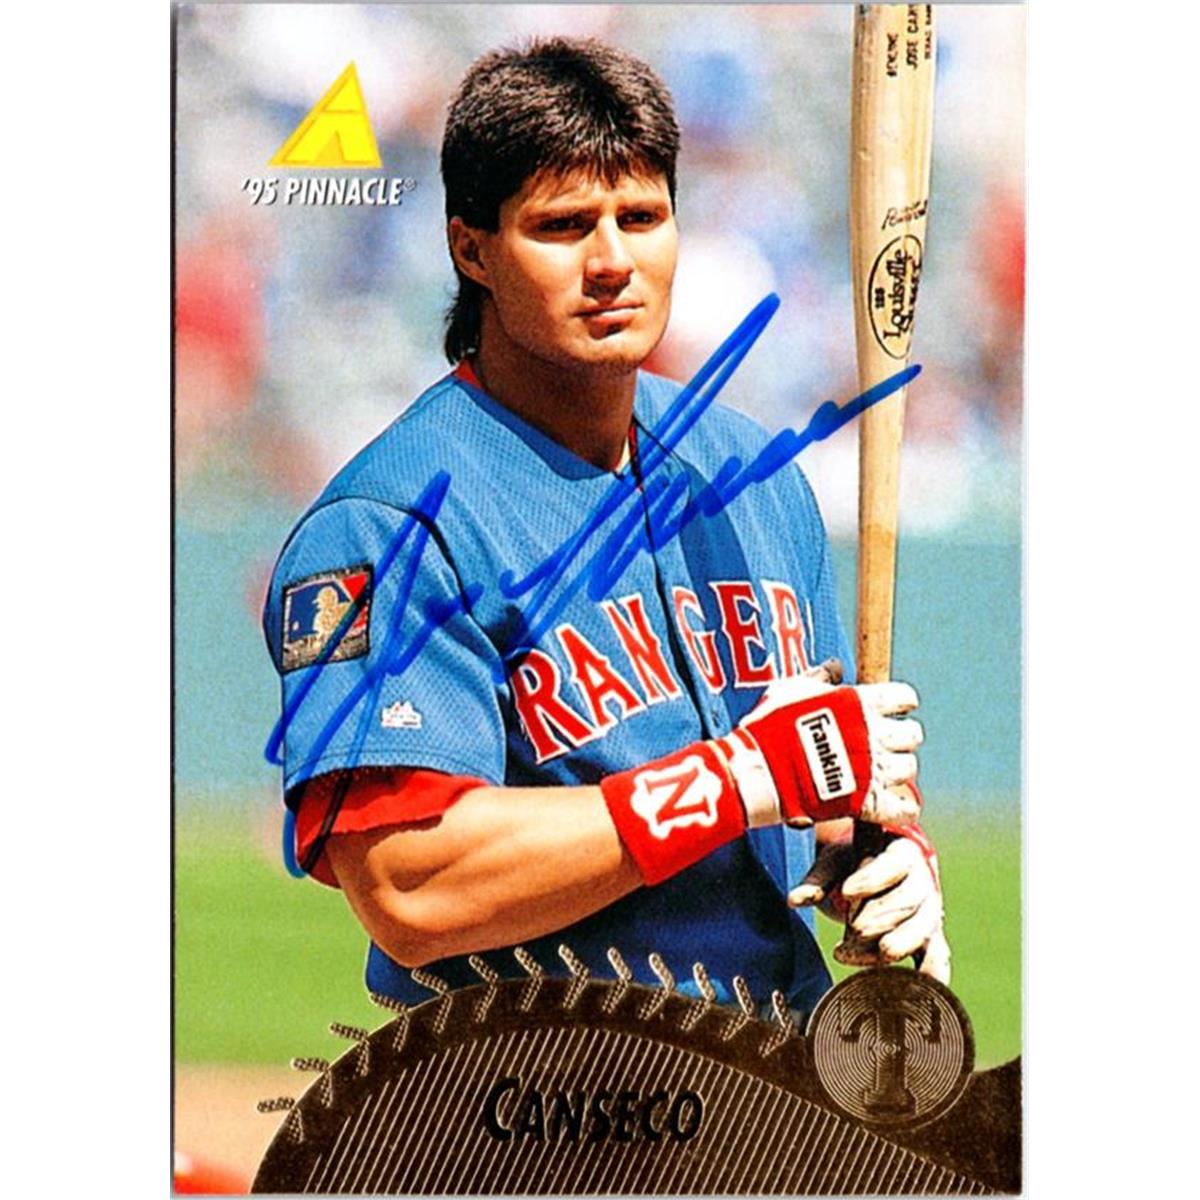 Jose Canseco signed jersey JSA Texas Rangers Autographed